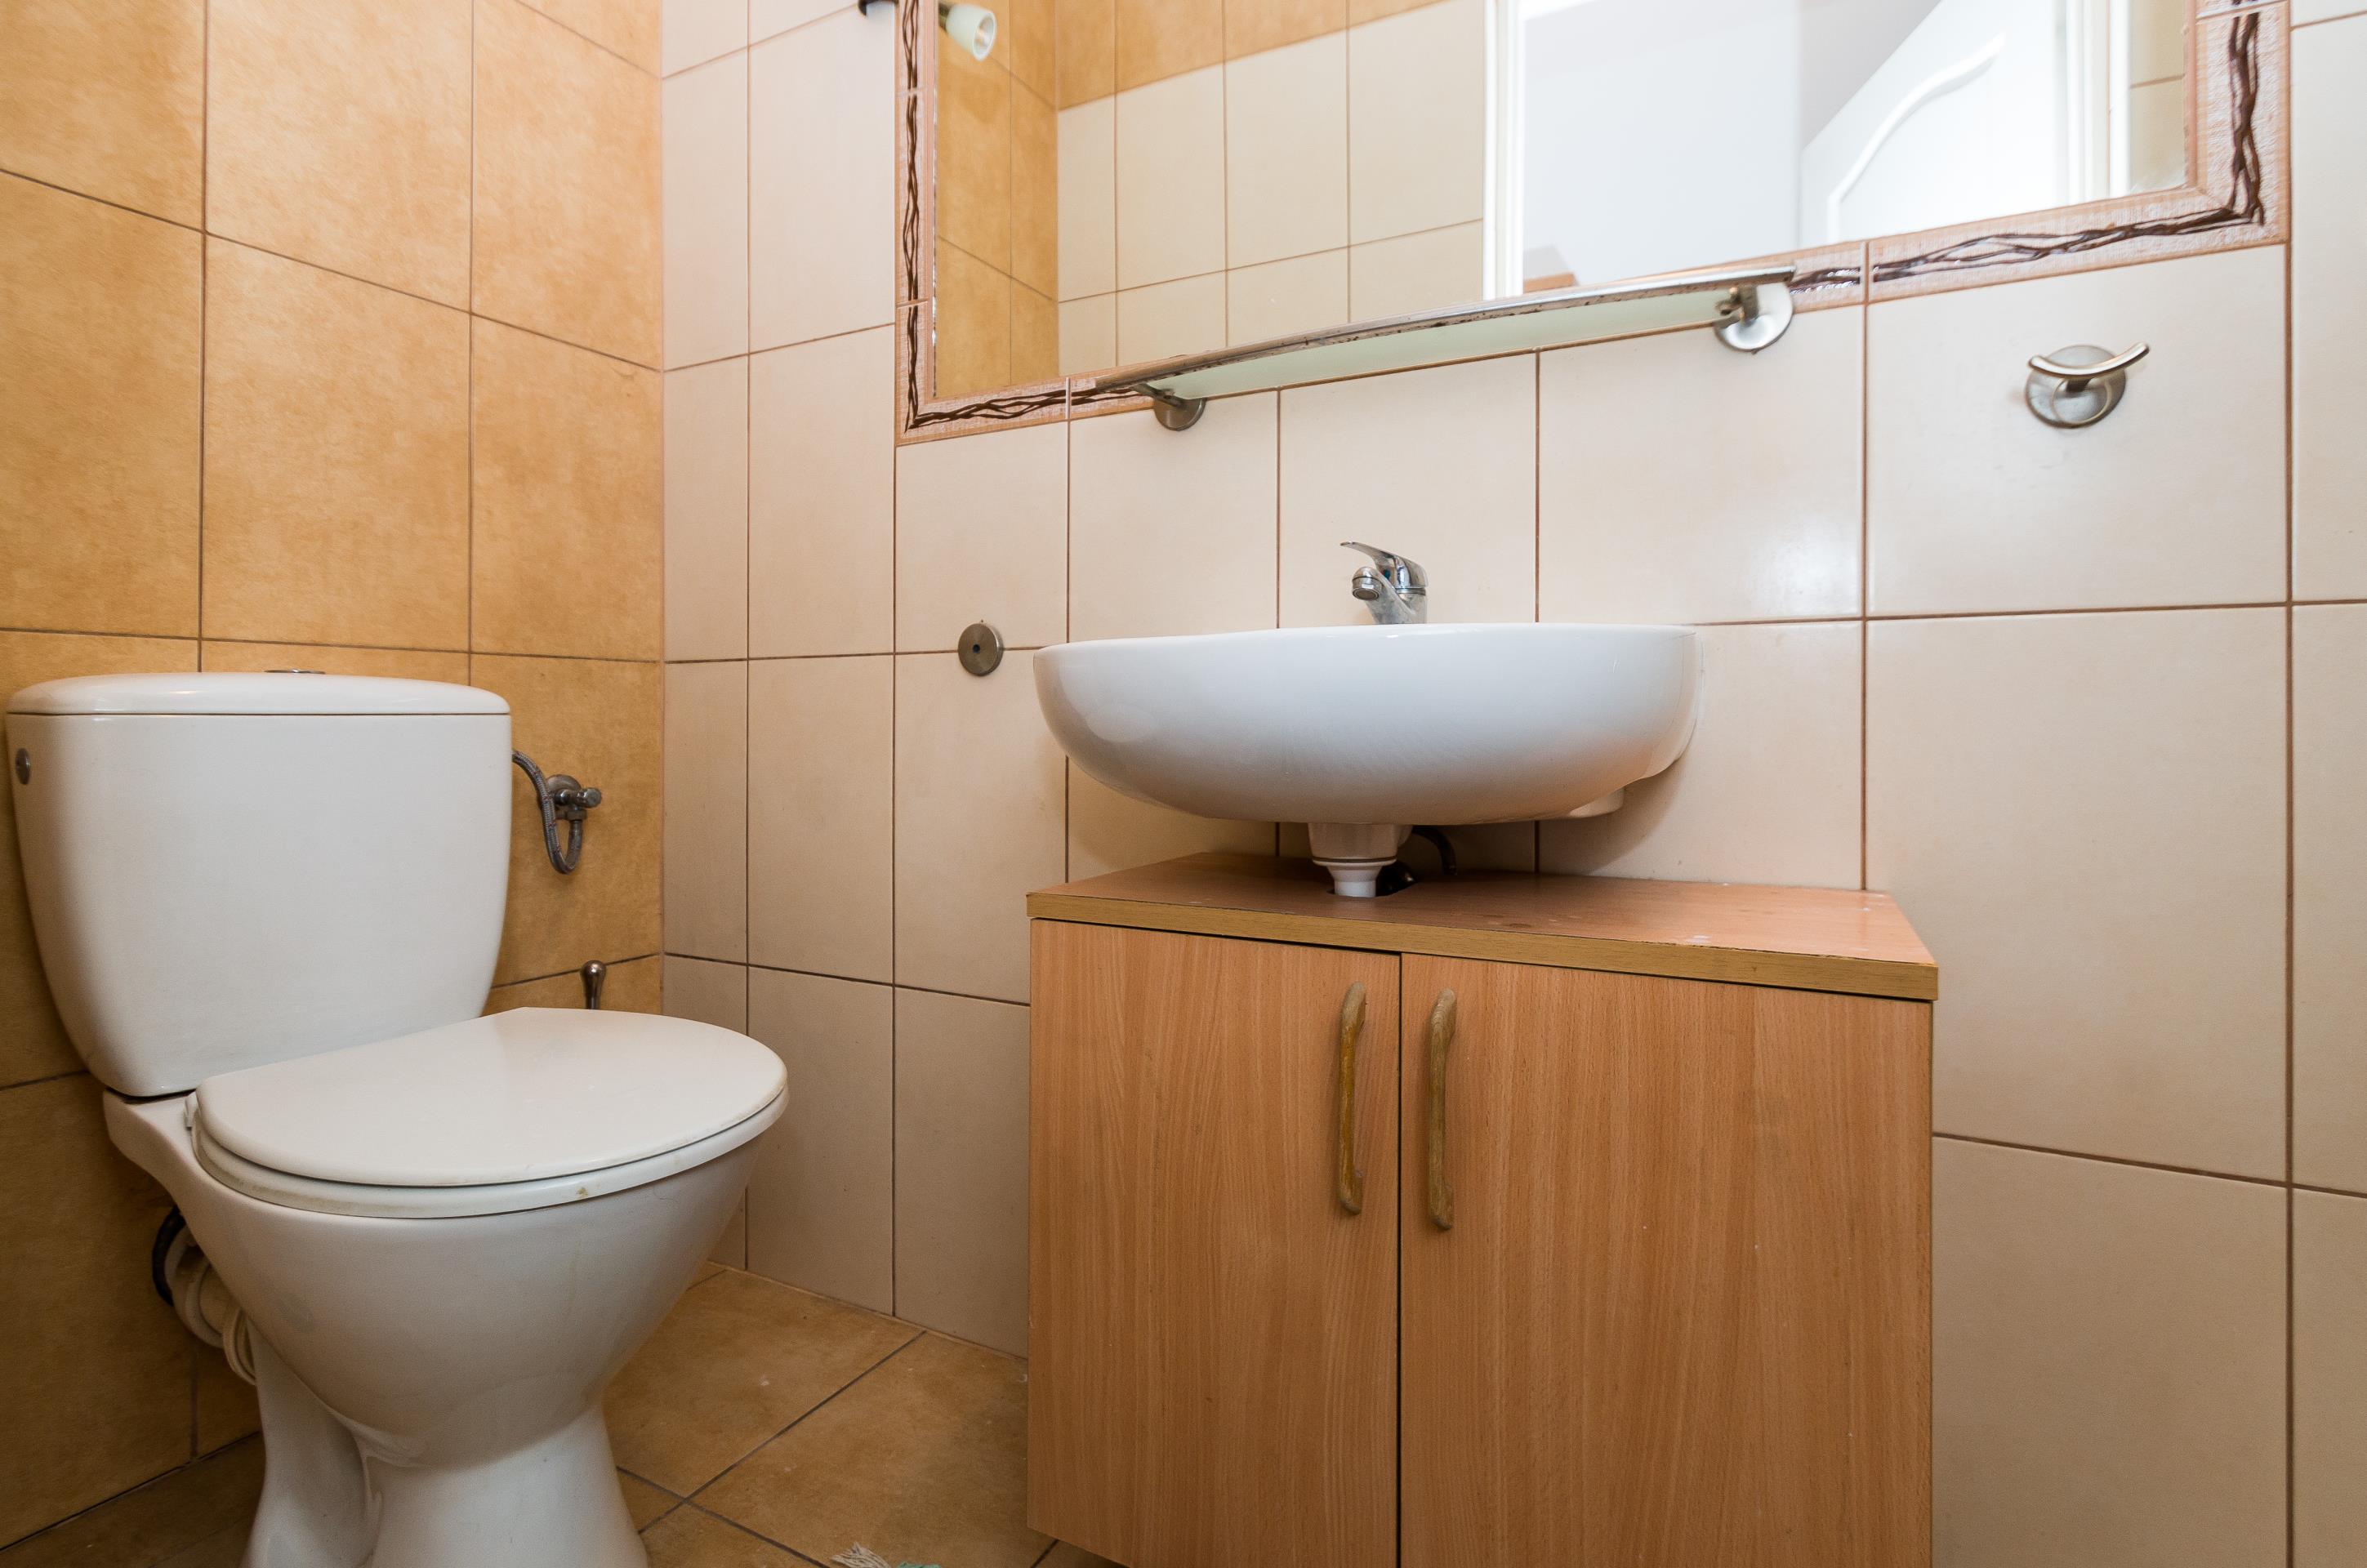 1-bedroom apartment in the heart of Kazimierz district.